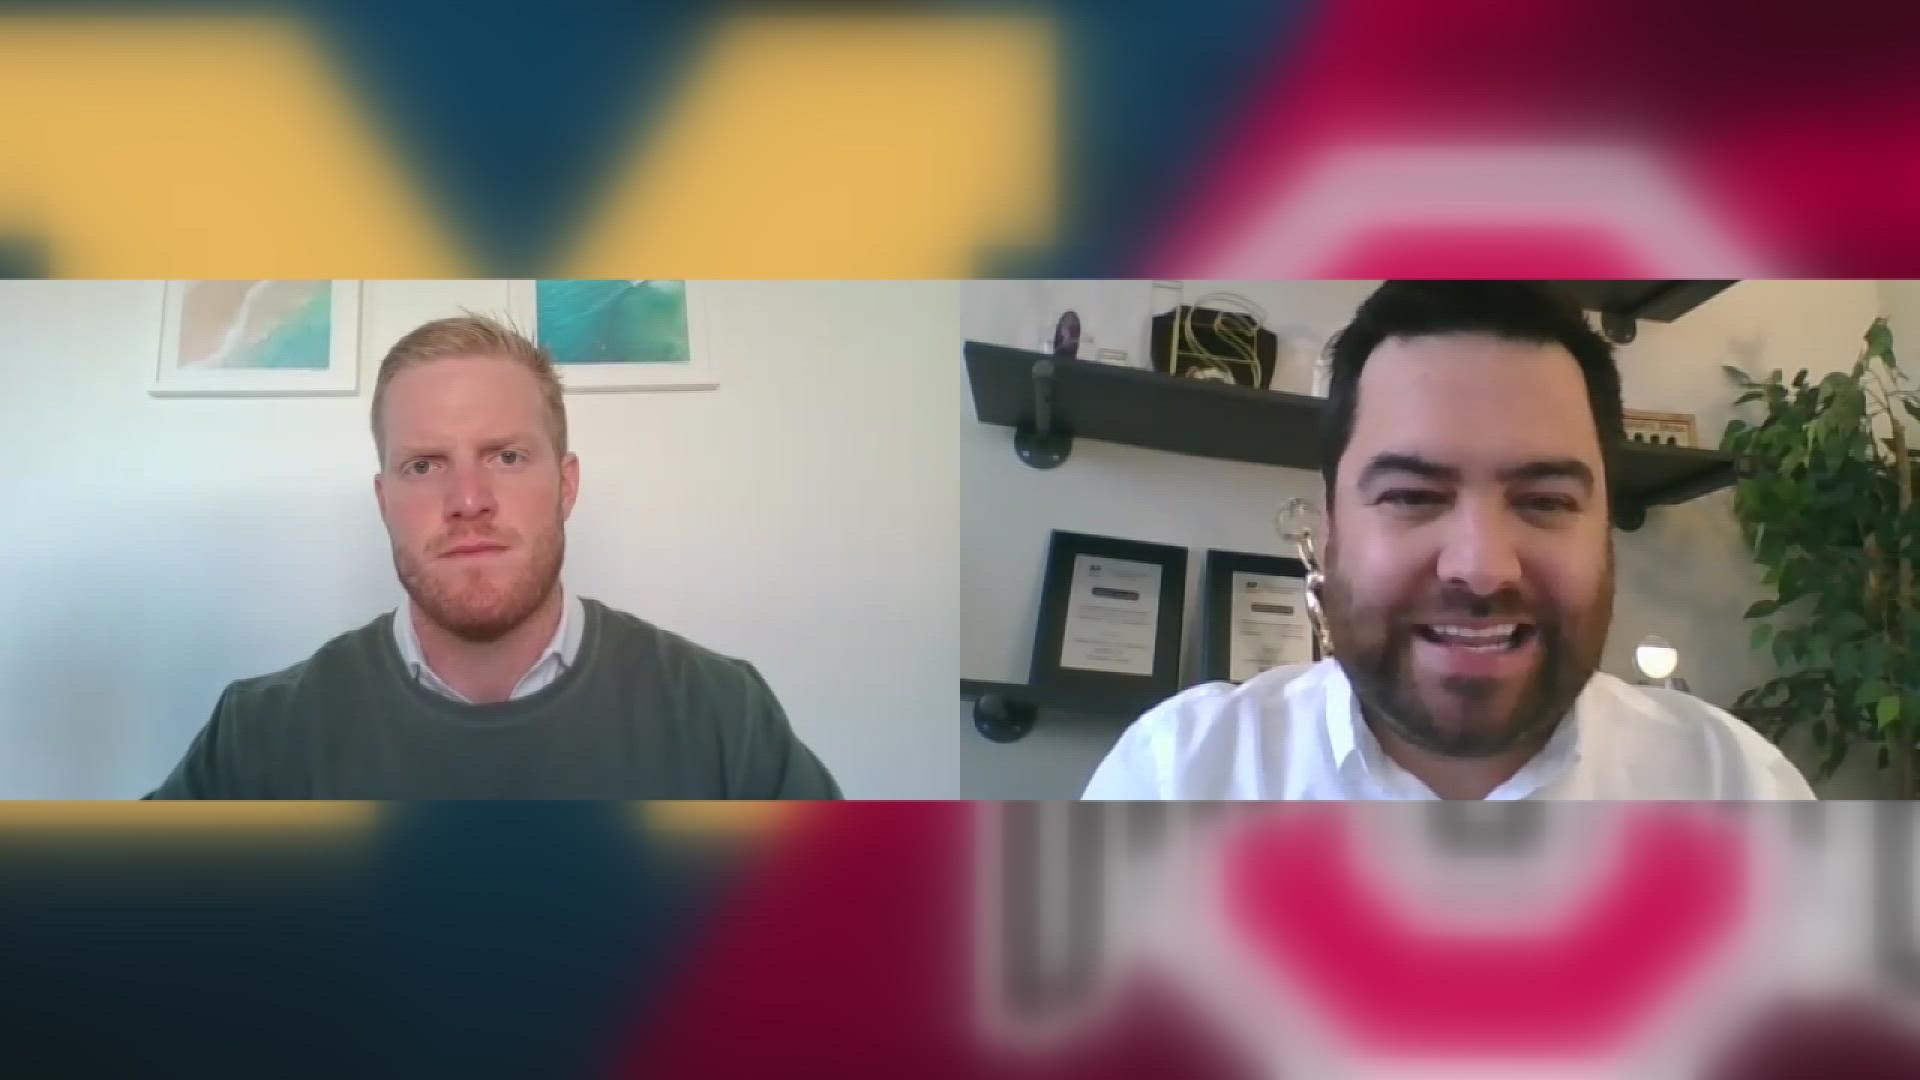 Toledo native and former Buckeye offensive lineman Jack Mewhort discusses what it’s like to play in the greatest rivalry in sports and has a prediction for the game.